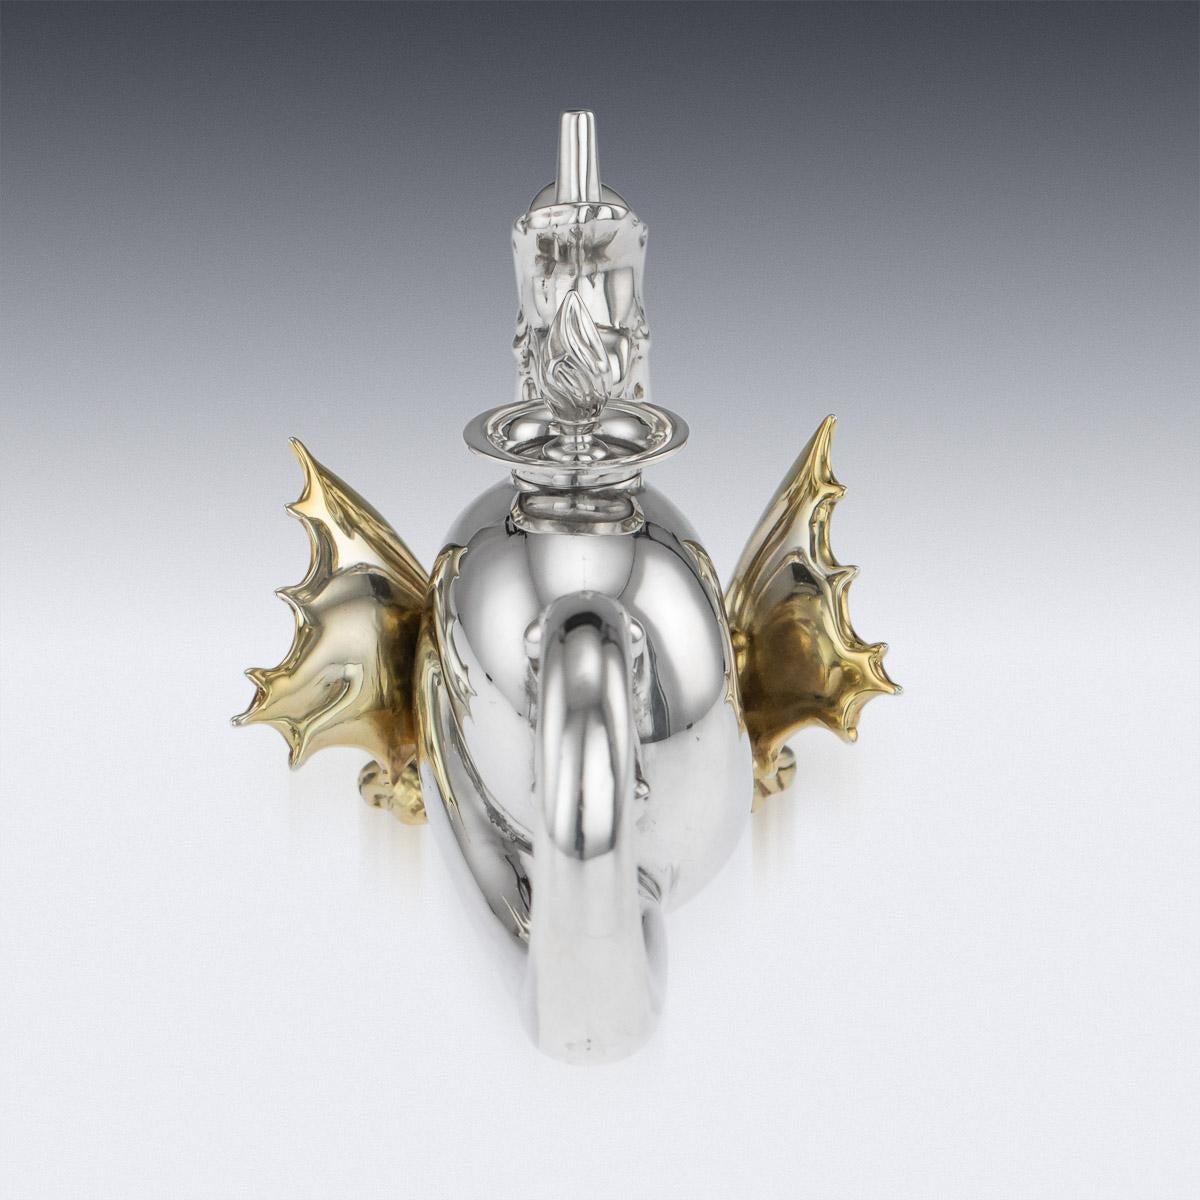 Antique 20th century novelty solid silver cigar light, unusually shaped as a dragon, the raised head forming the light and the tail forming the handle, applied with gilt wings and feet. Hallmarked English Silver (925 Standard), Birmingham, year 1923